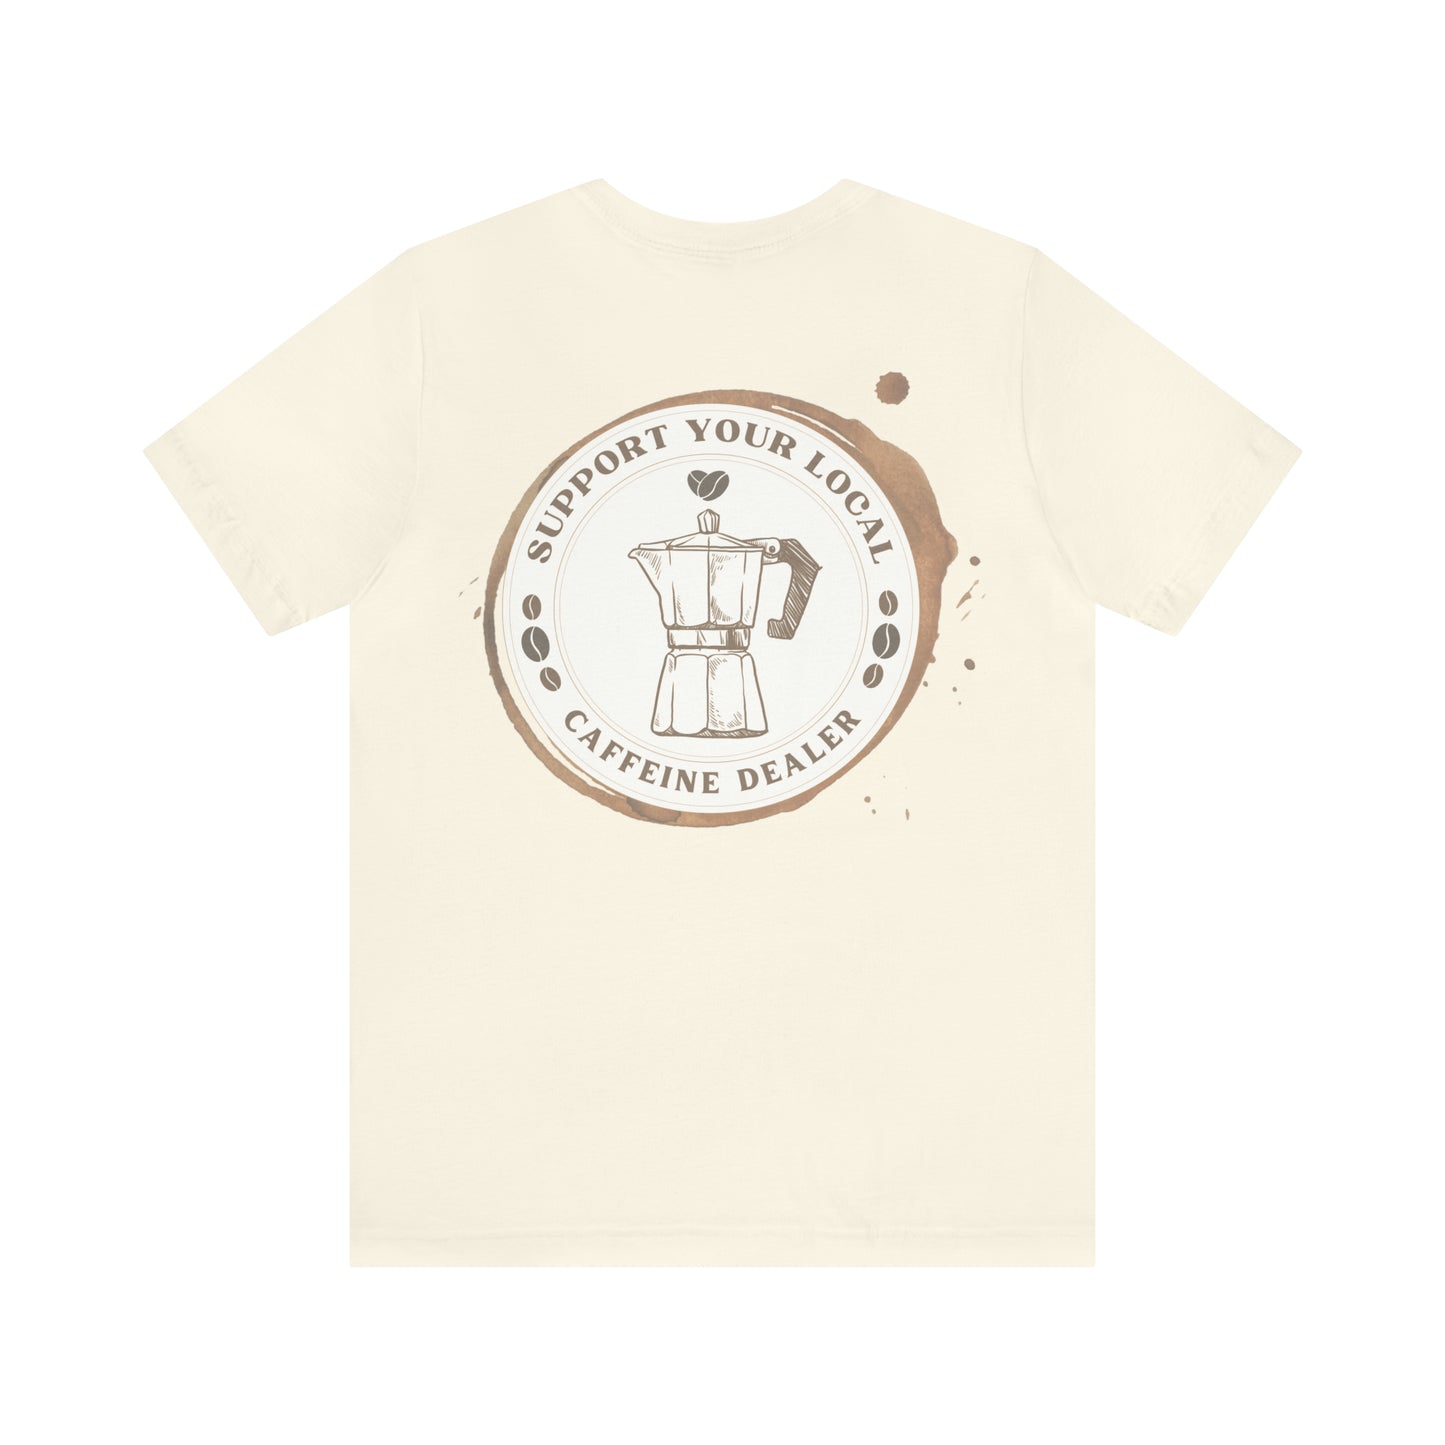 Support your Local Caffeine Dealer t-shirt | Coffee | Graphic Tee 2